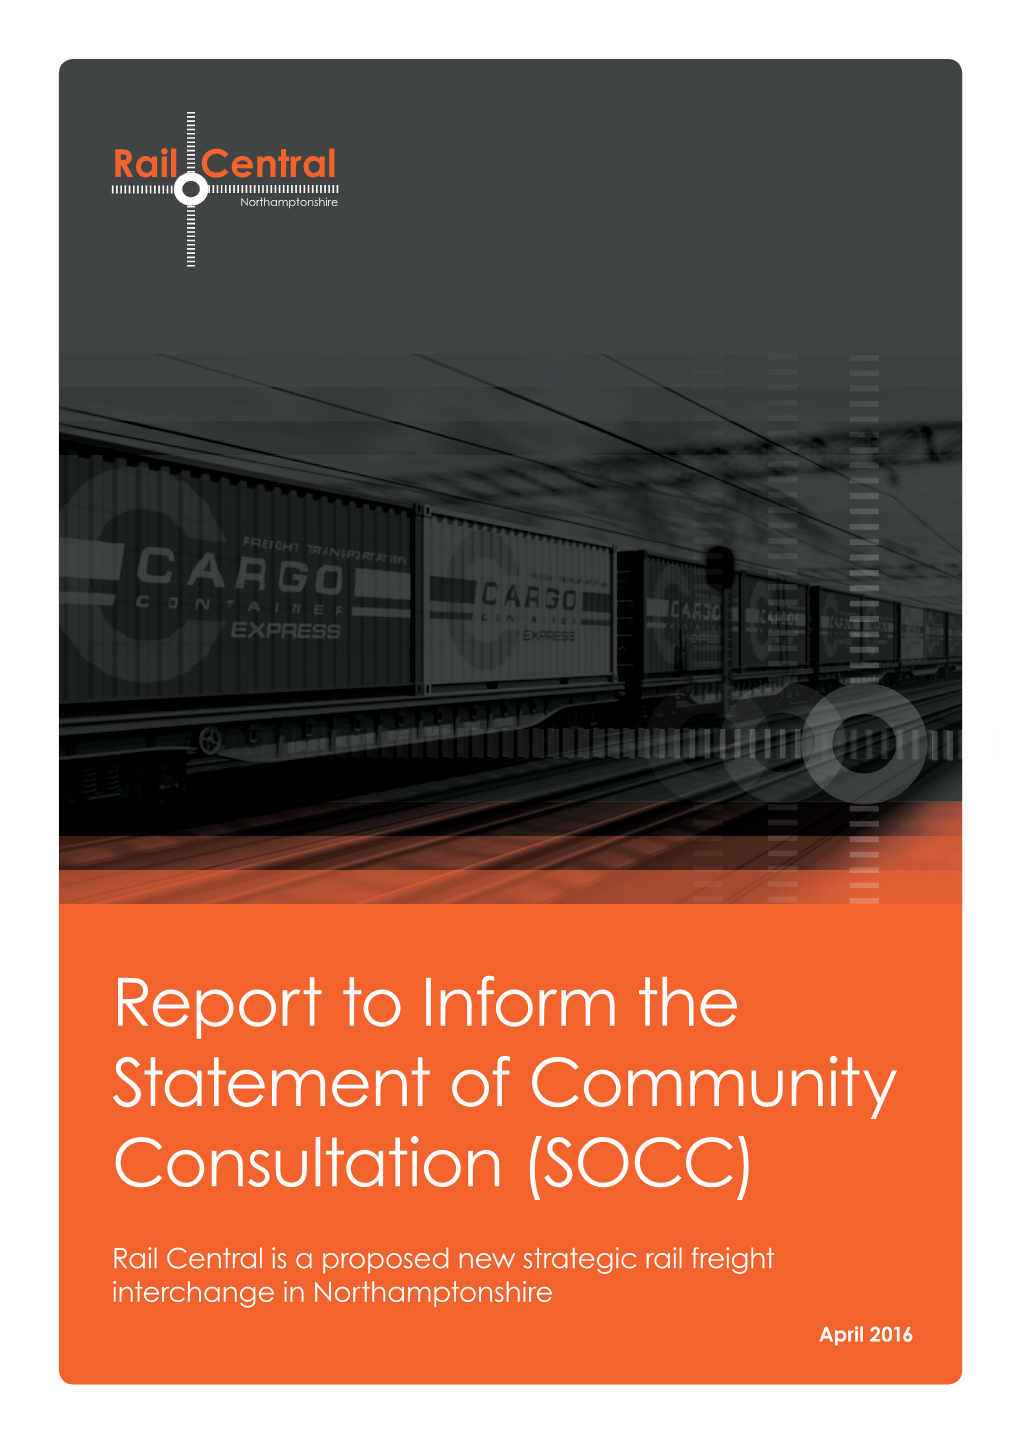 Report to Inform the Statement of Community Consultation (SOCC)